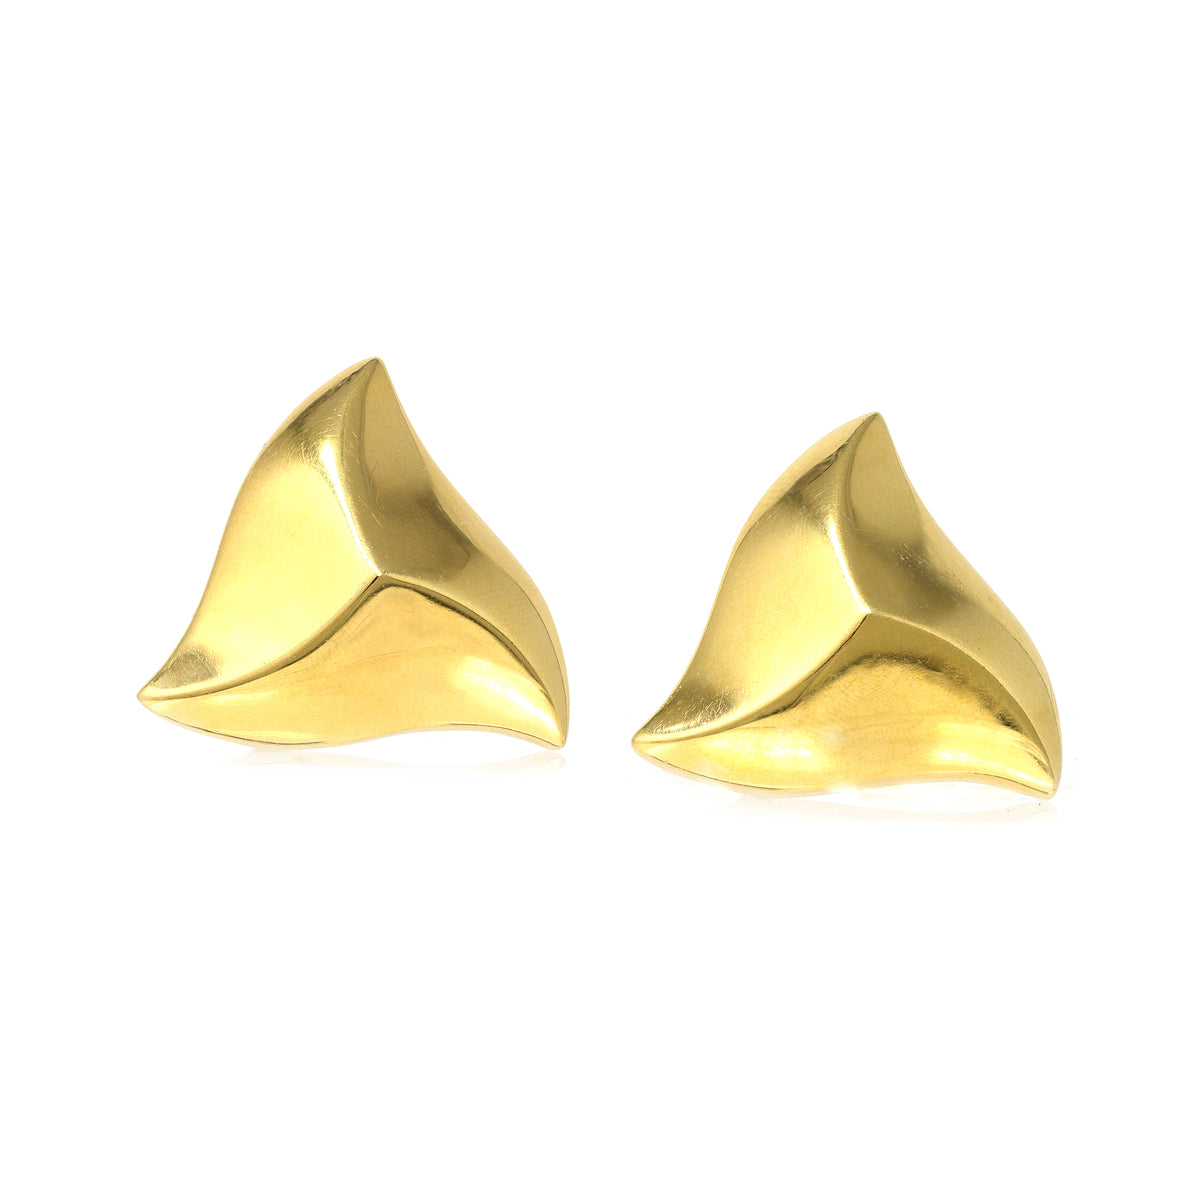 Signed Angela Cummings Pyramidal Clip On Earrings in 18 Karat Yellow Gold front view